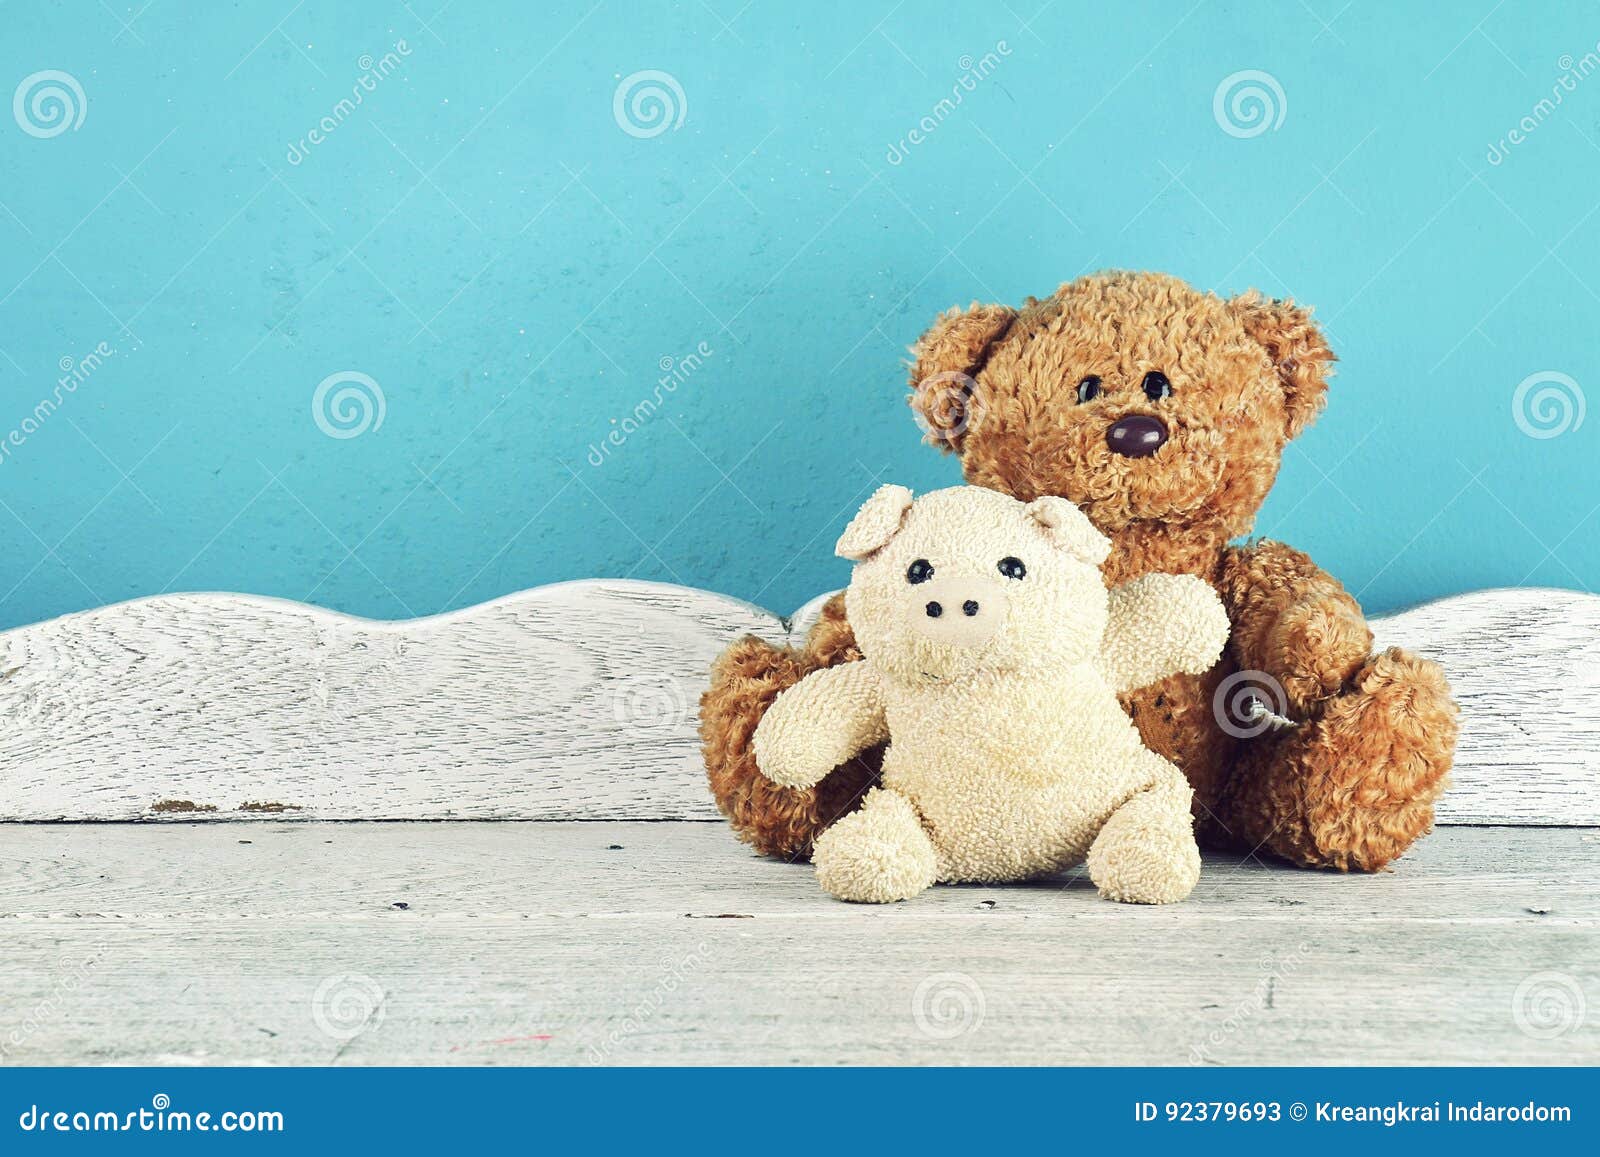 stuffed animal toys on the white wooden table, animal dolls, friends concept.